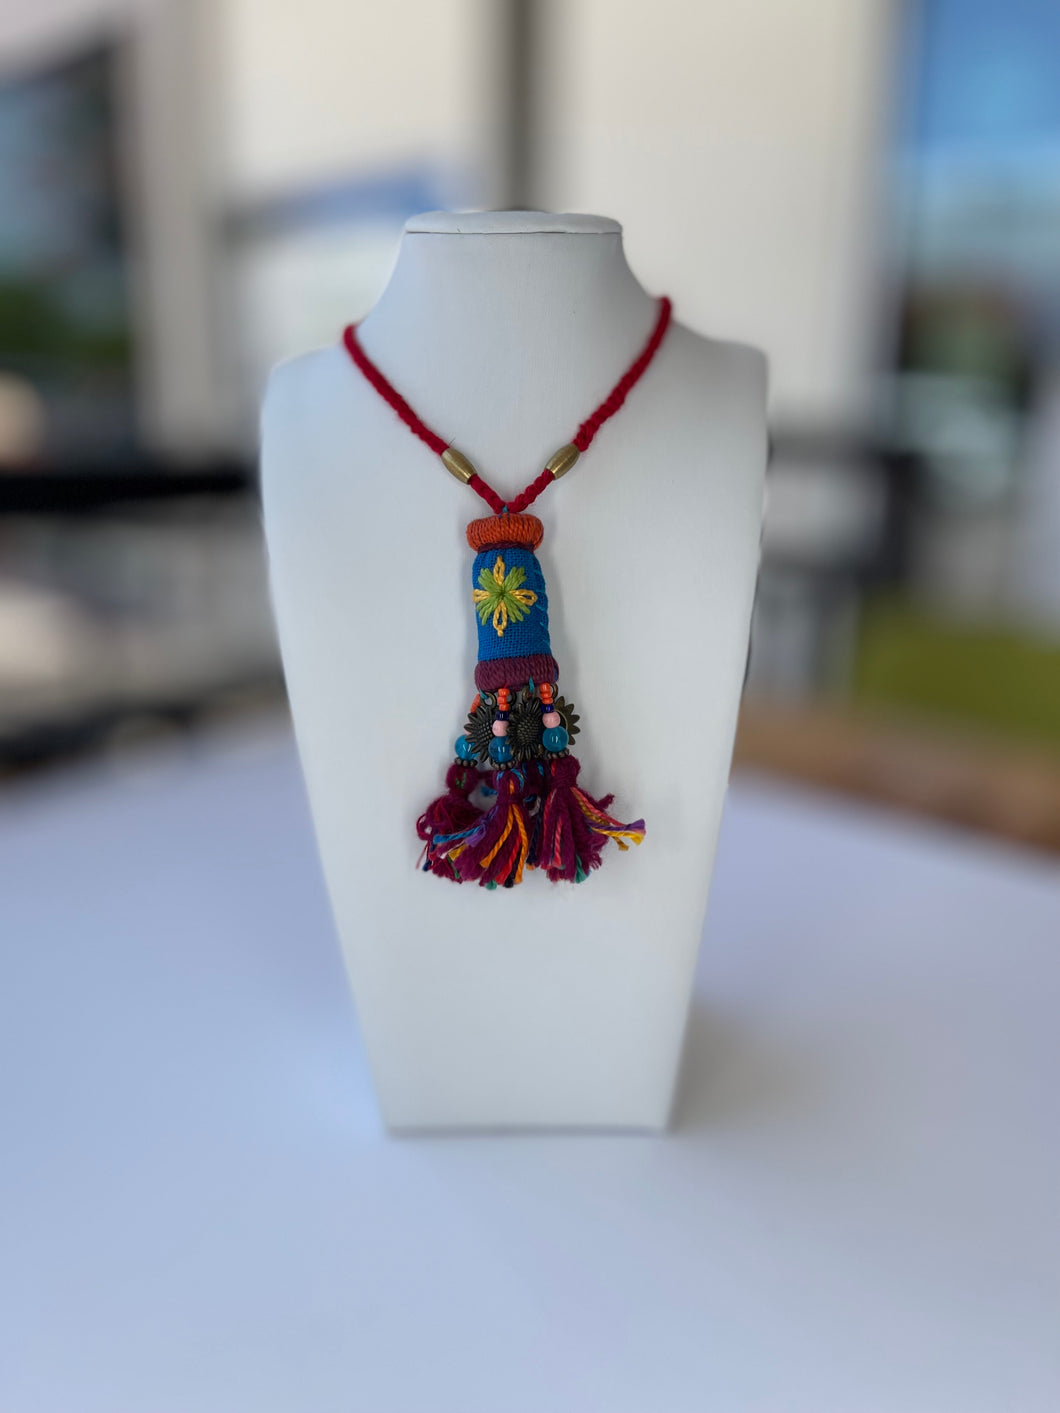 Handcraft necklaces from Thailand (N35-05)